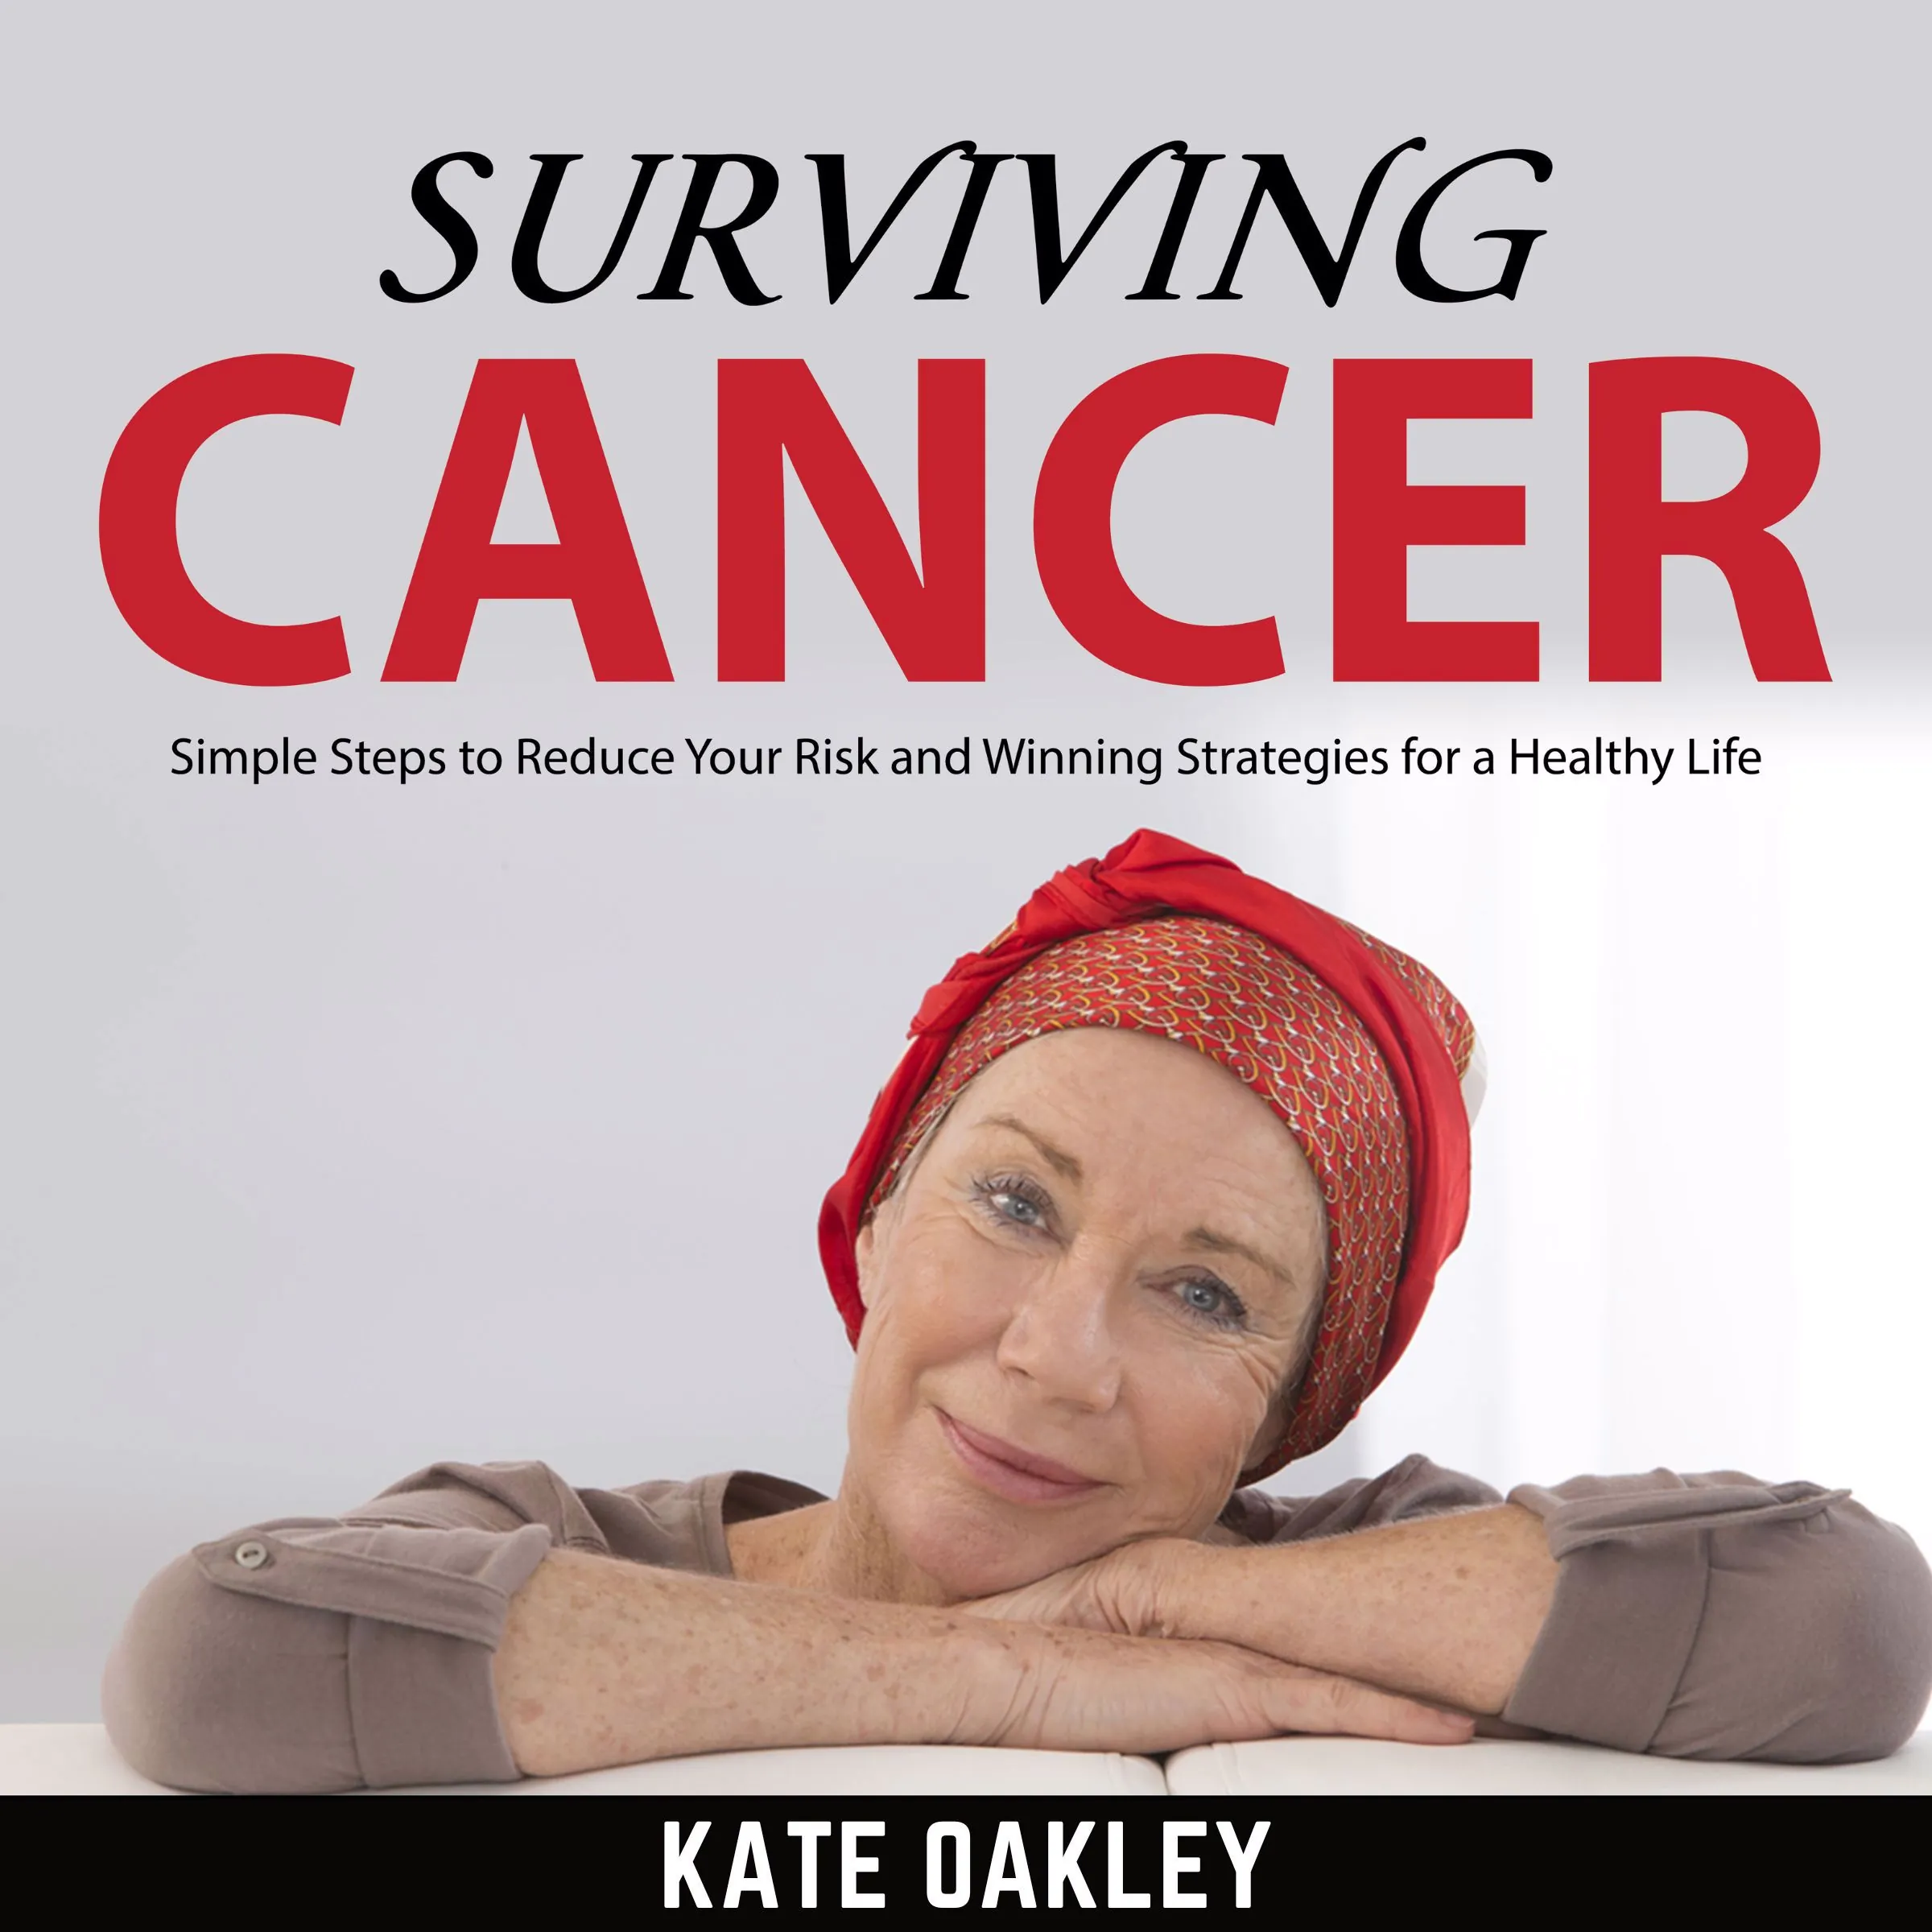 Surviving Cancer Audiobook by Kate Oakley